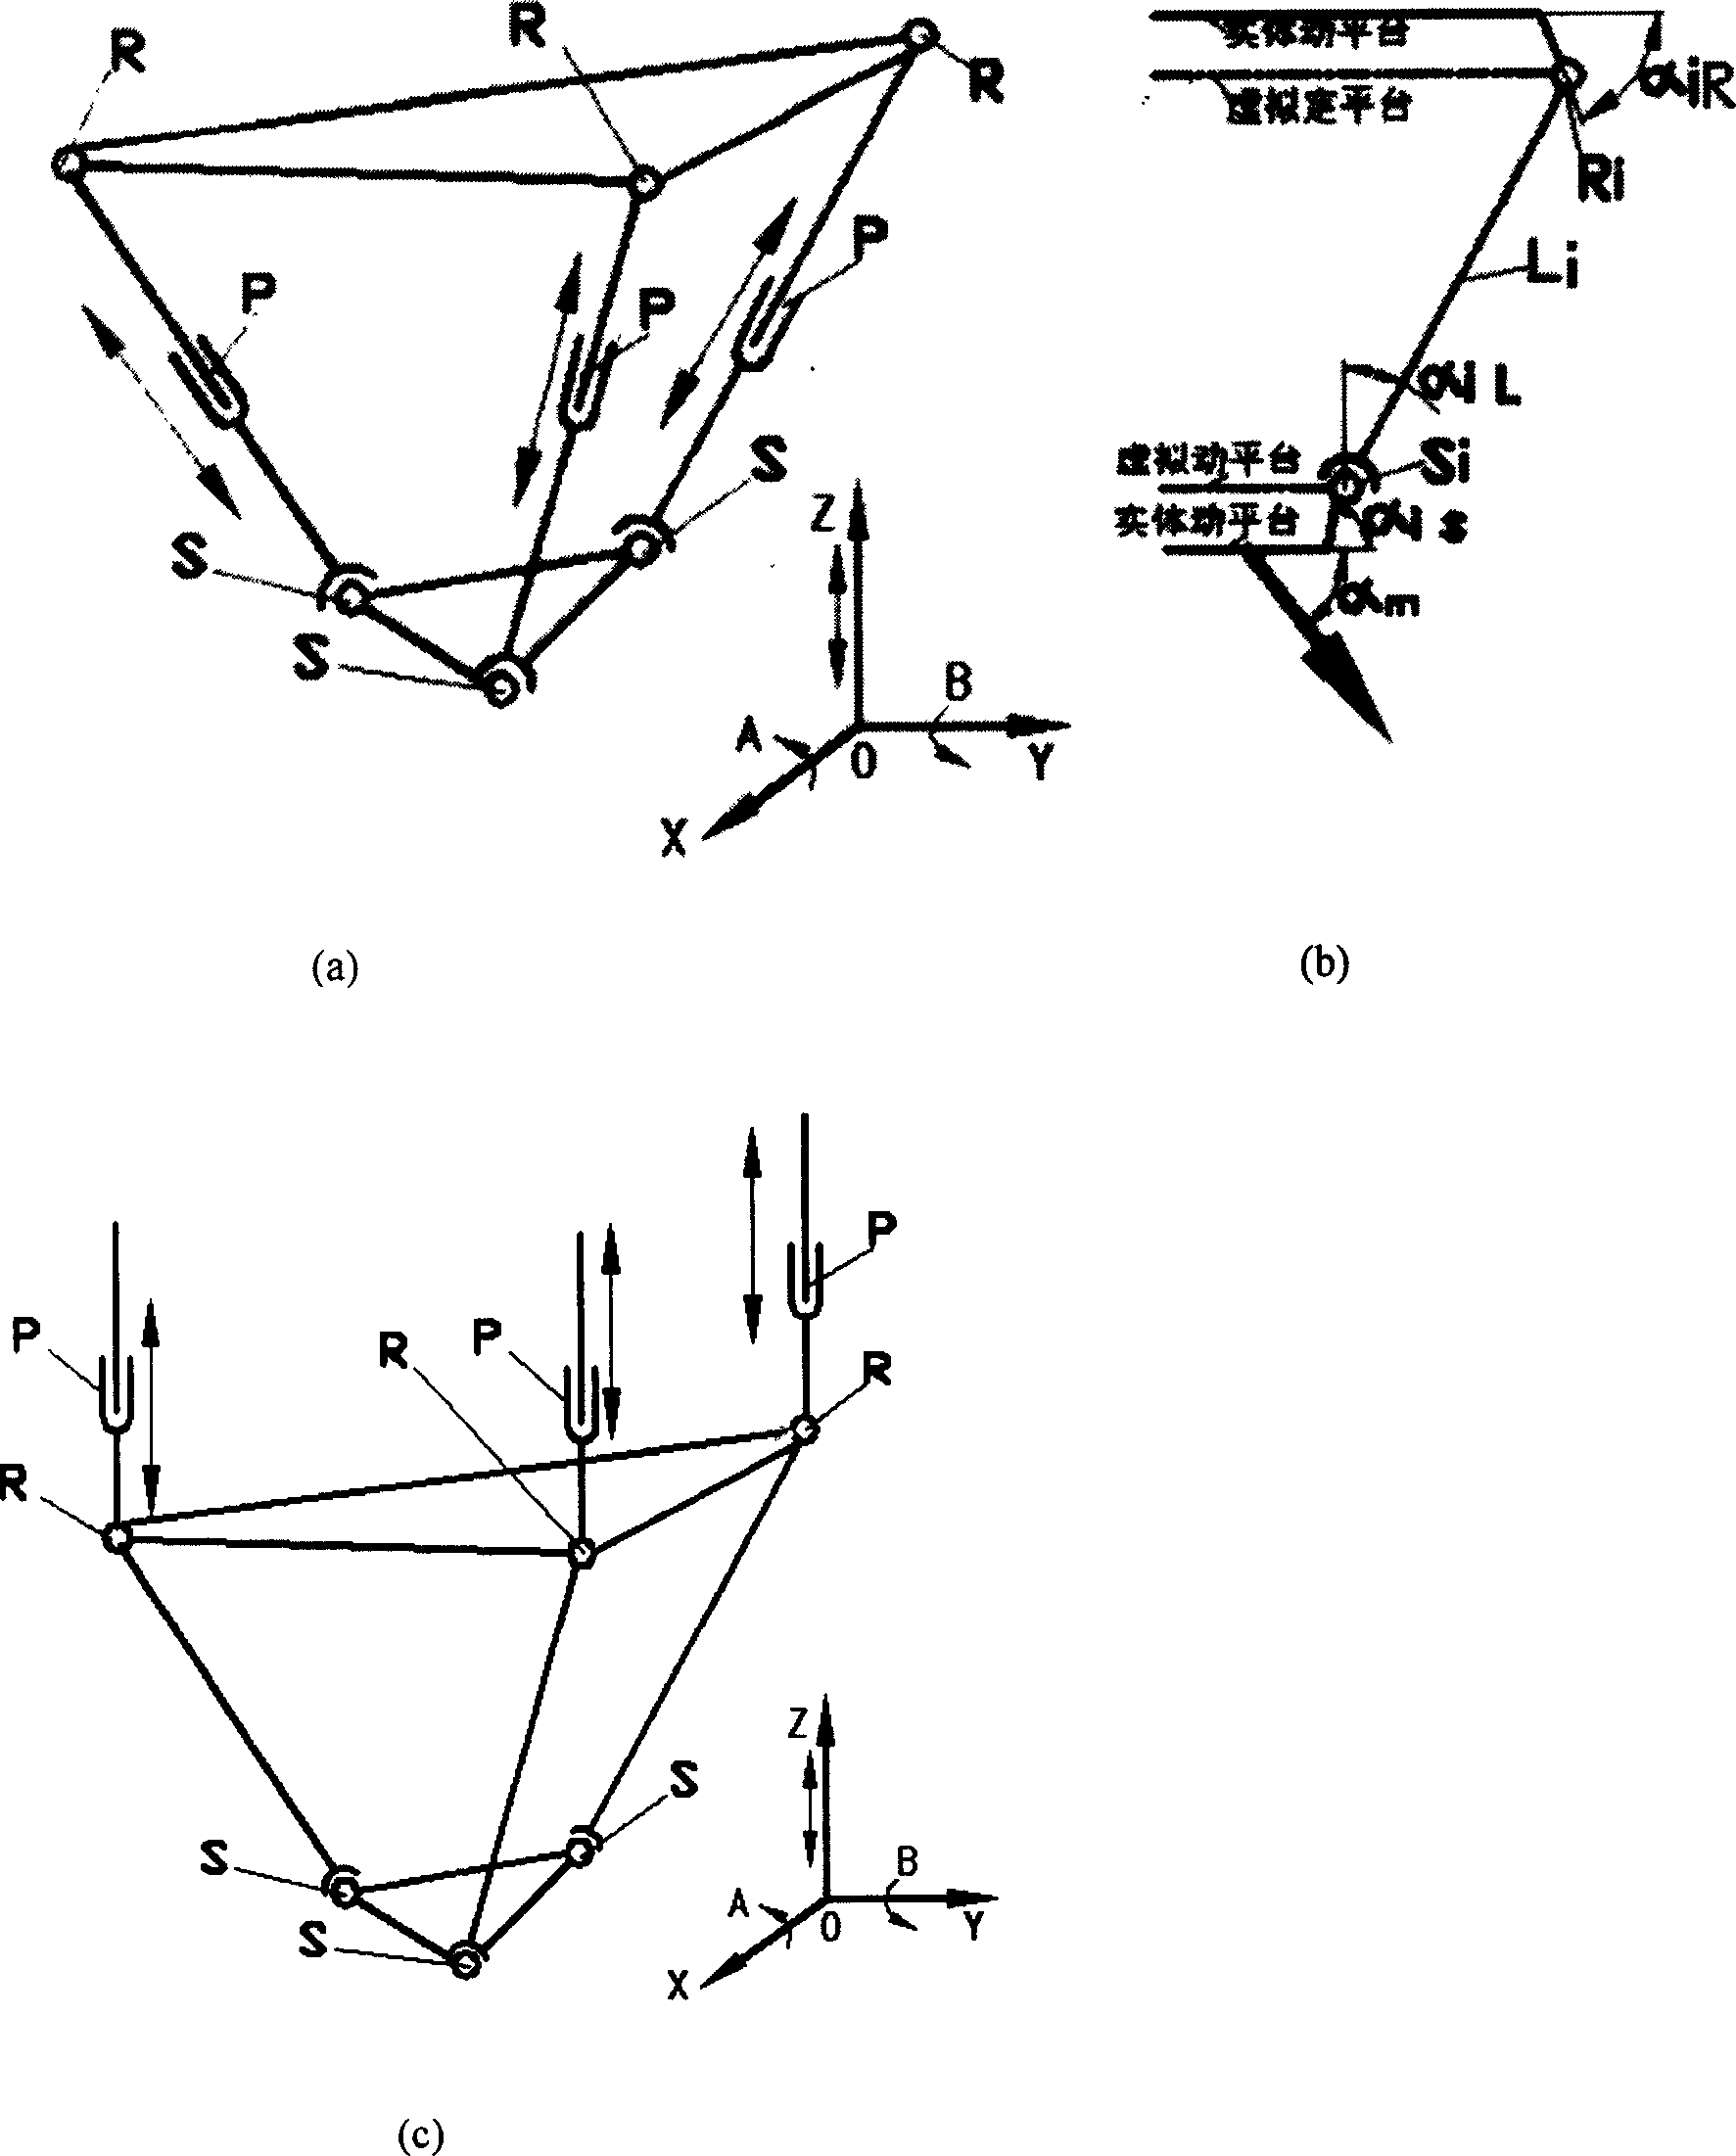 Three-axle parallel mainshaft head structure for implemonting multidirection verticel-horizontal processing